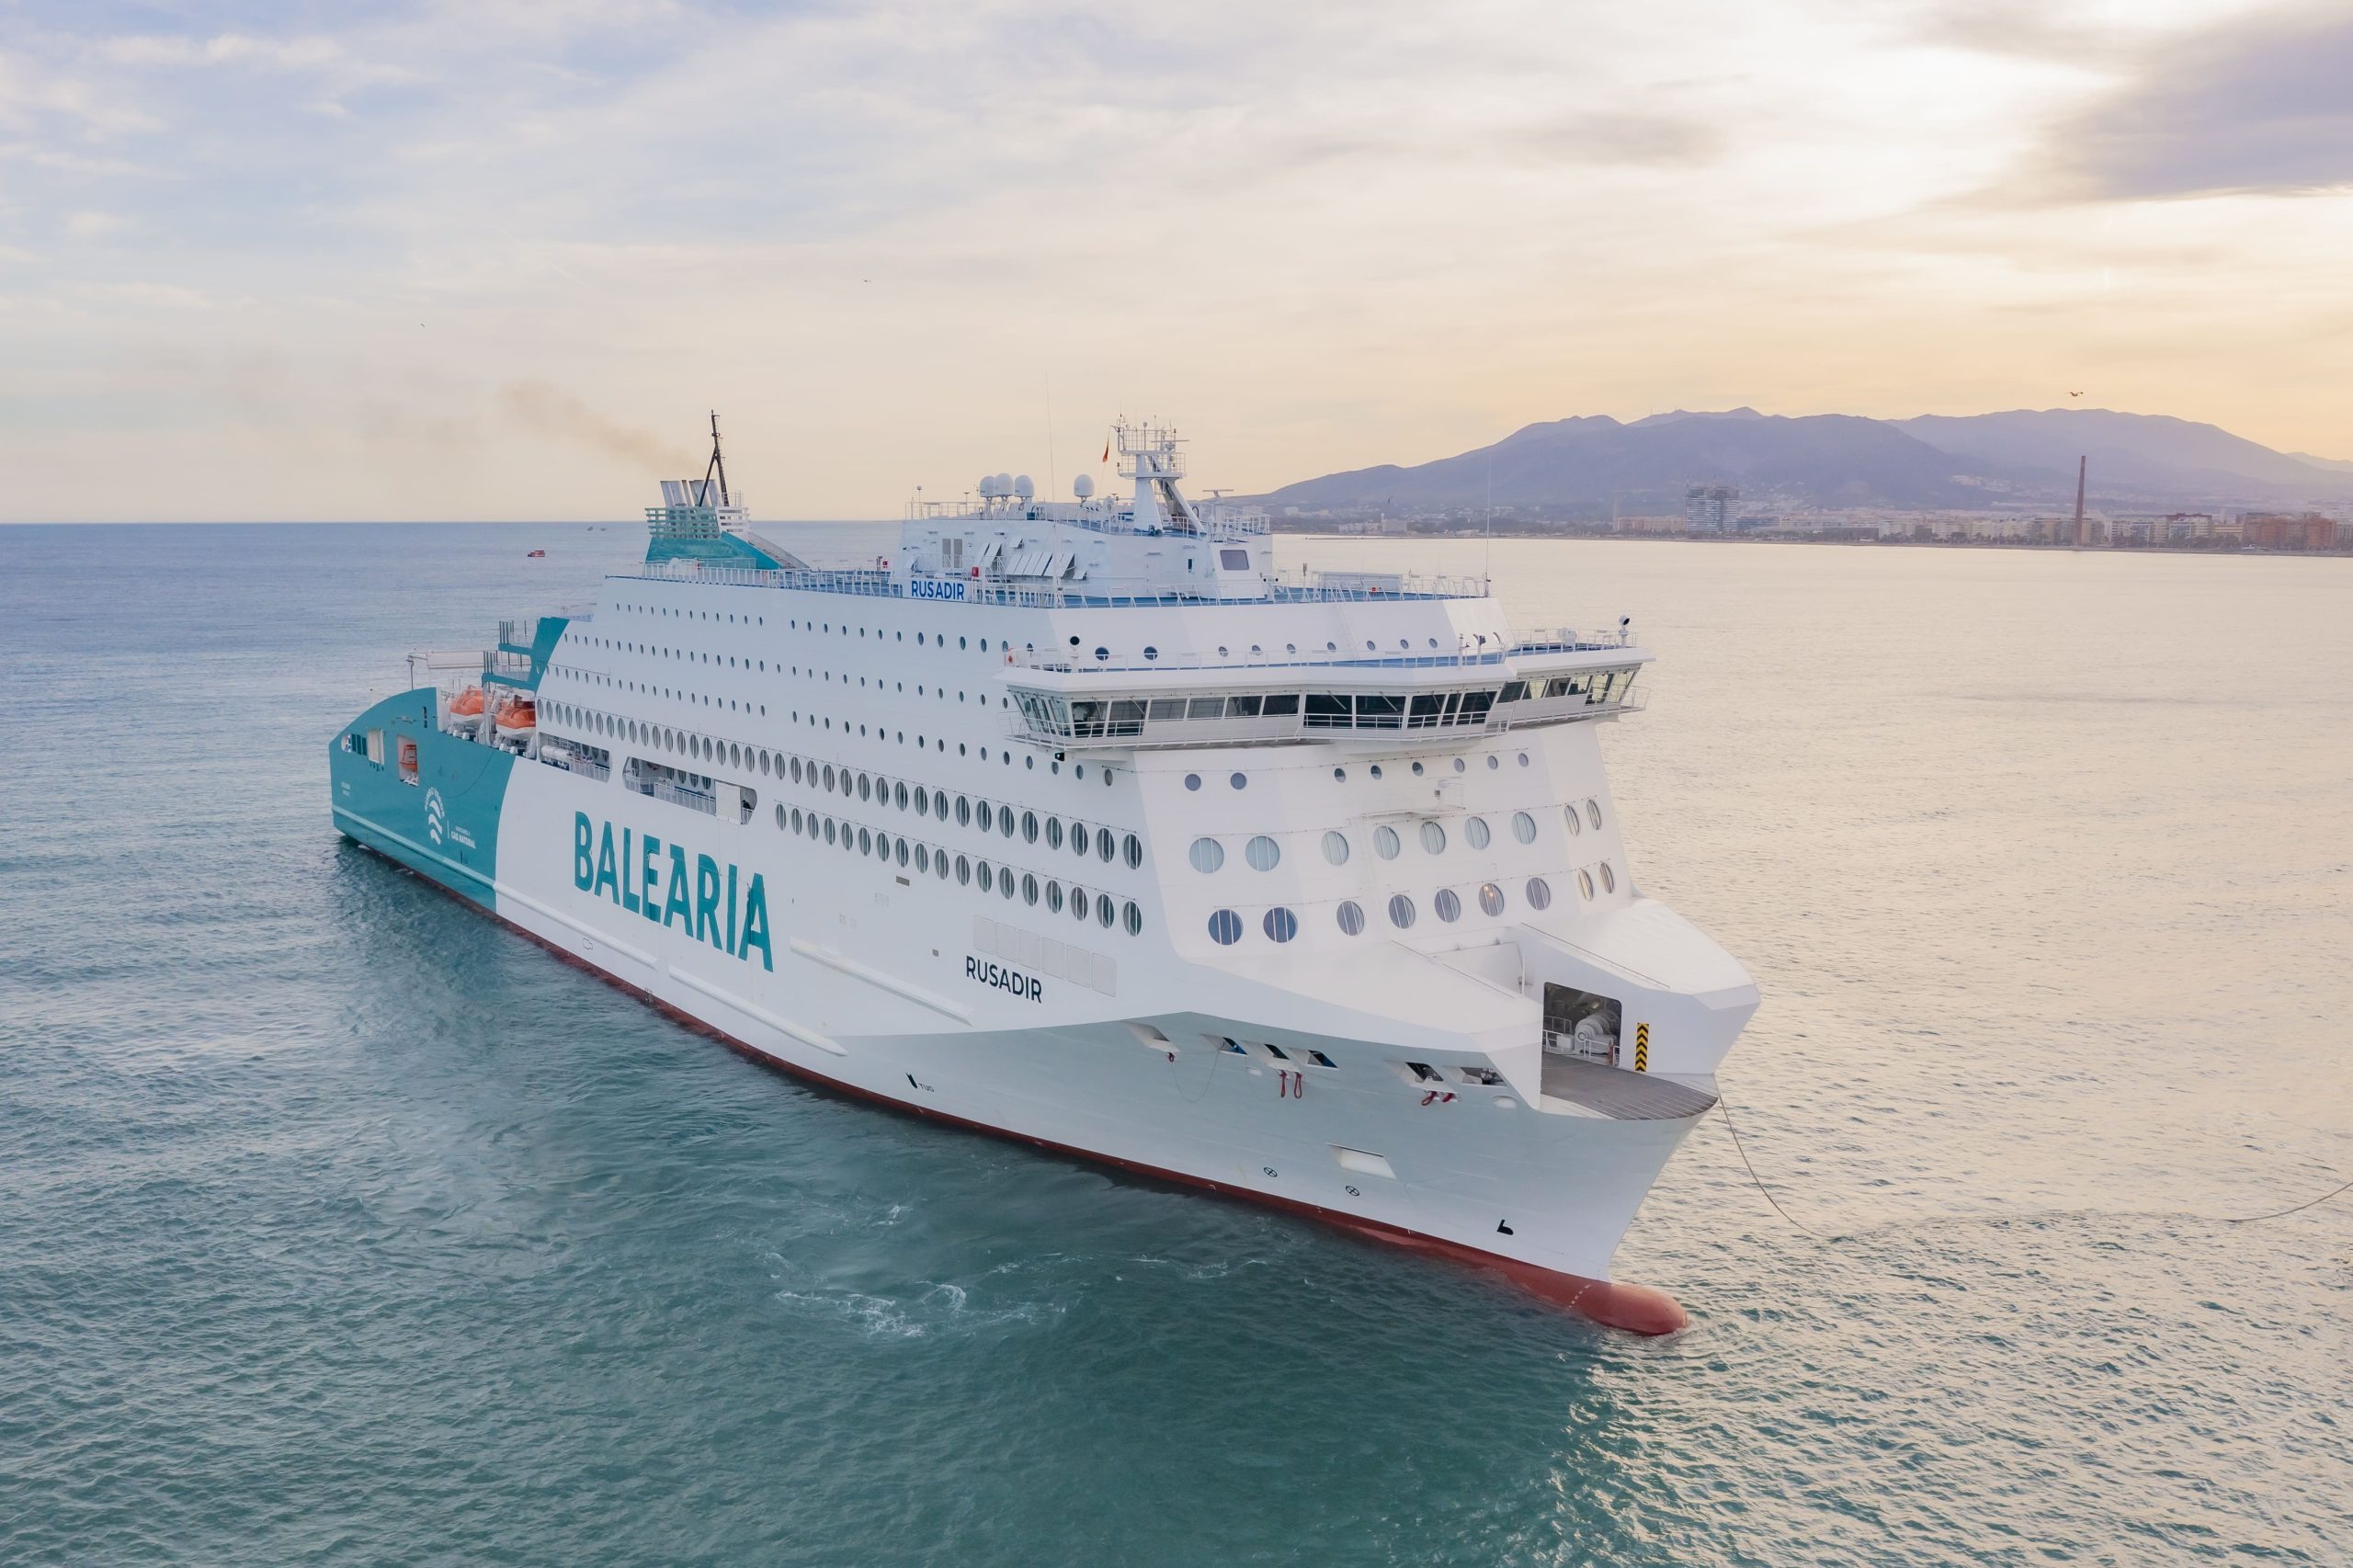 Spain's Balearia buys LNG-powered ferry